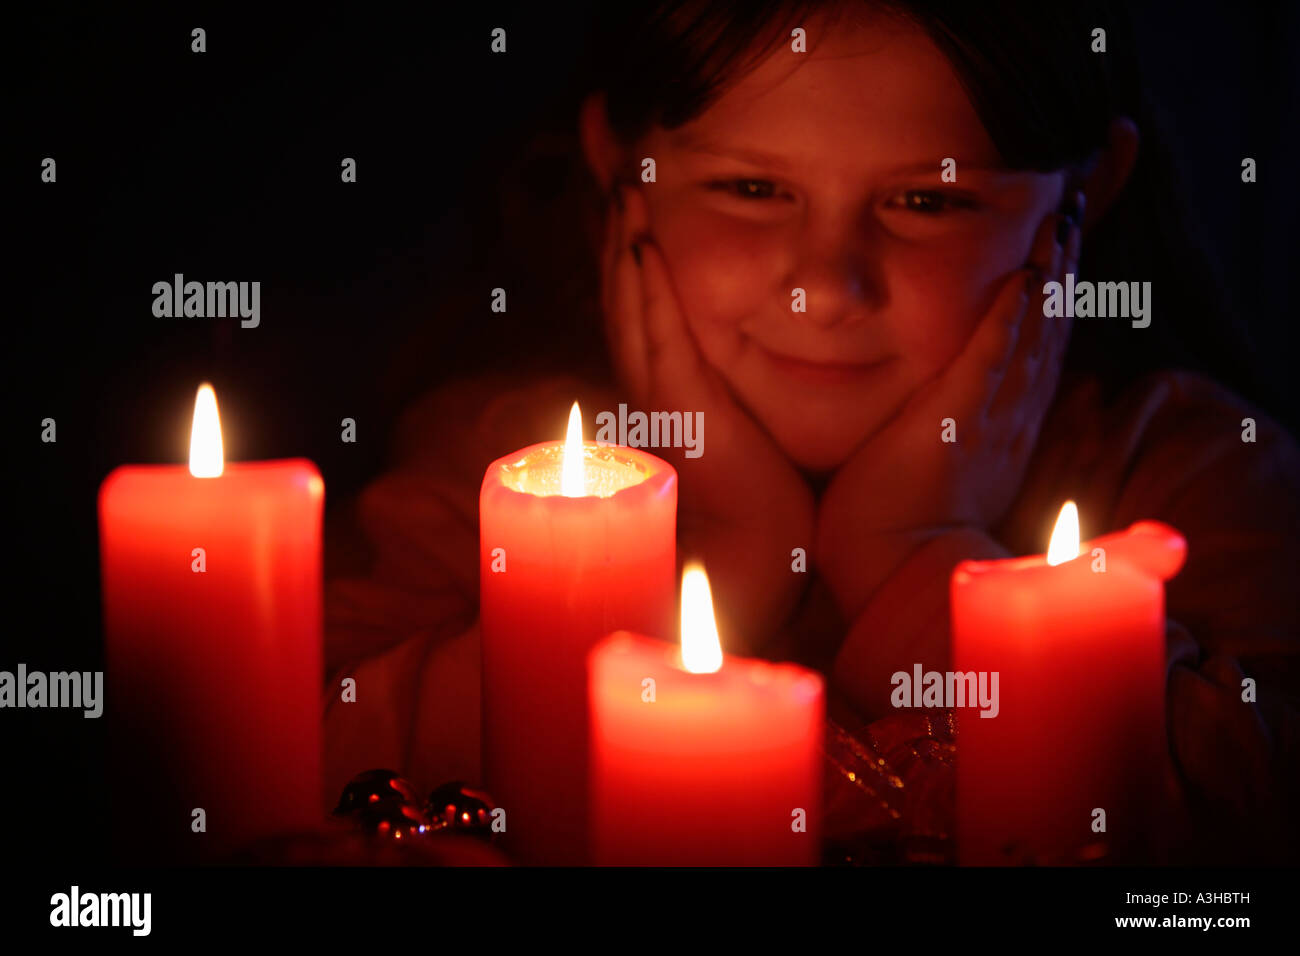 young girl looking happily at the candles of an Advent wreath Stock Photo